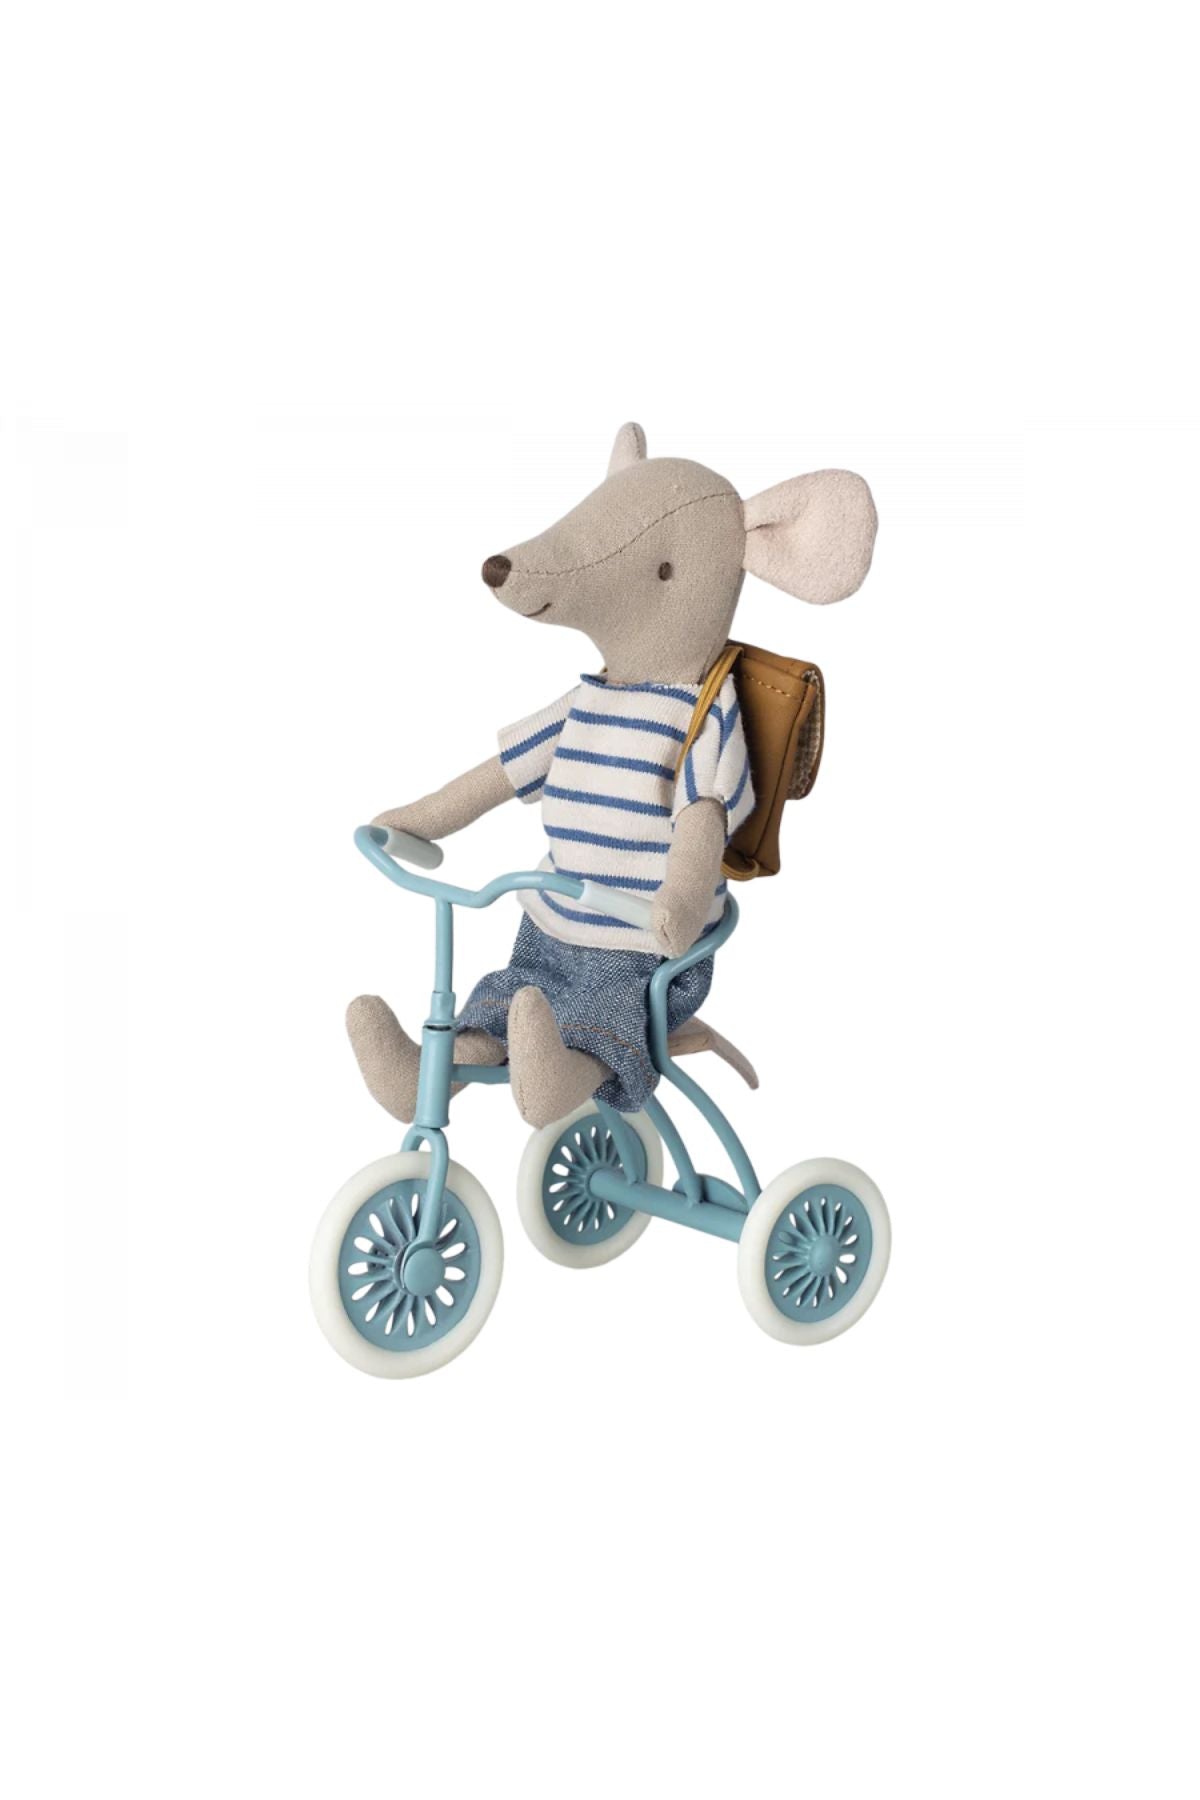 Maileg Abri a Tricycle - Petrol Blue (Mouse Size) Dollhouse Toy